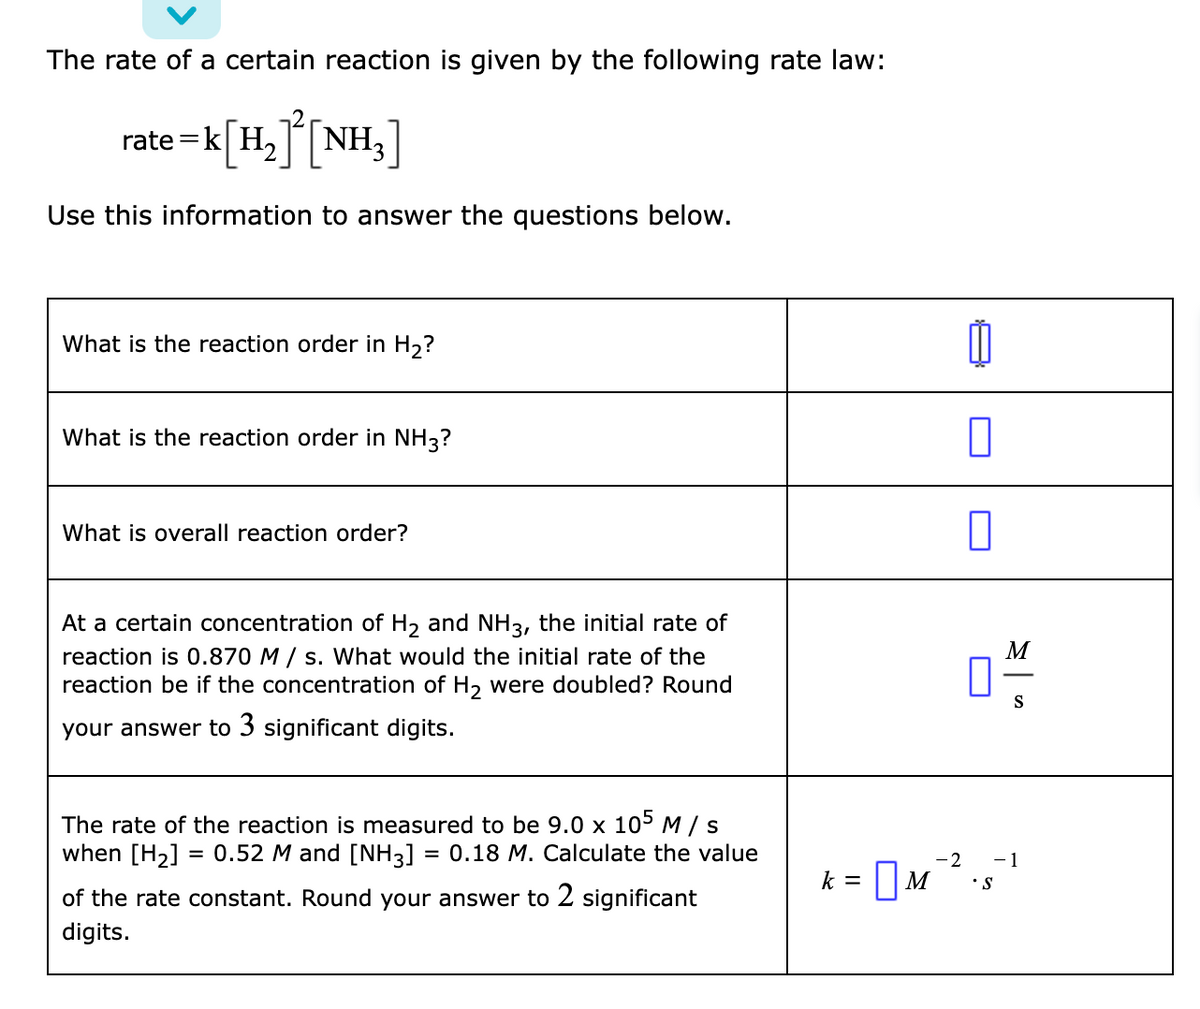 The rate of a certain reaction is given by the following rate law:
rate =k H,NH3
=K[H,J[NH,]
Use this information to answer the questions below.
What is the reaction order in H2?
What is the reaction order in NH3?
What is overall reaction order?
At a certain concentration of H, and NH3, the initial rate of
reaction is 0.870 M / s. What would the initial rate of the
reaction be if the concentration of H, were doubled? Round
M
S
your answer to 3 significant digits.
The rate of the reaction is measured to be 9.0 x 105M/s
when [H2] = 0.52 M and [NH3] = 0.18 M. Calculate the value
- 1
%3D
%3D
k = 0M"
-2
•S
of the rate constant. Round your answer to 2 significant
digits.
